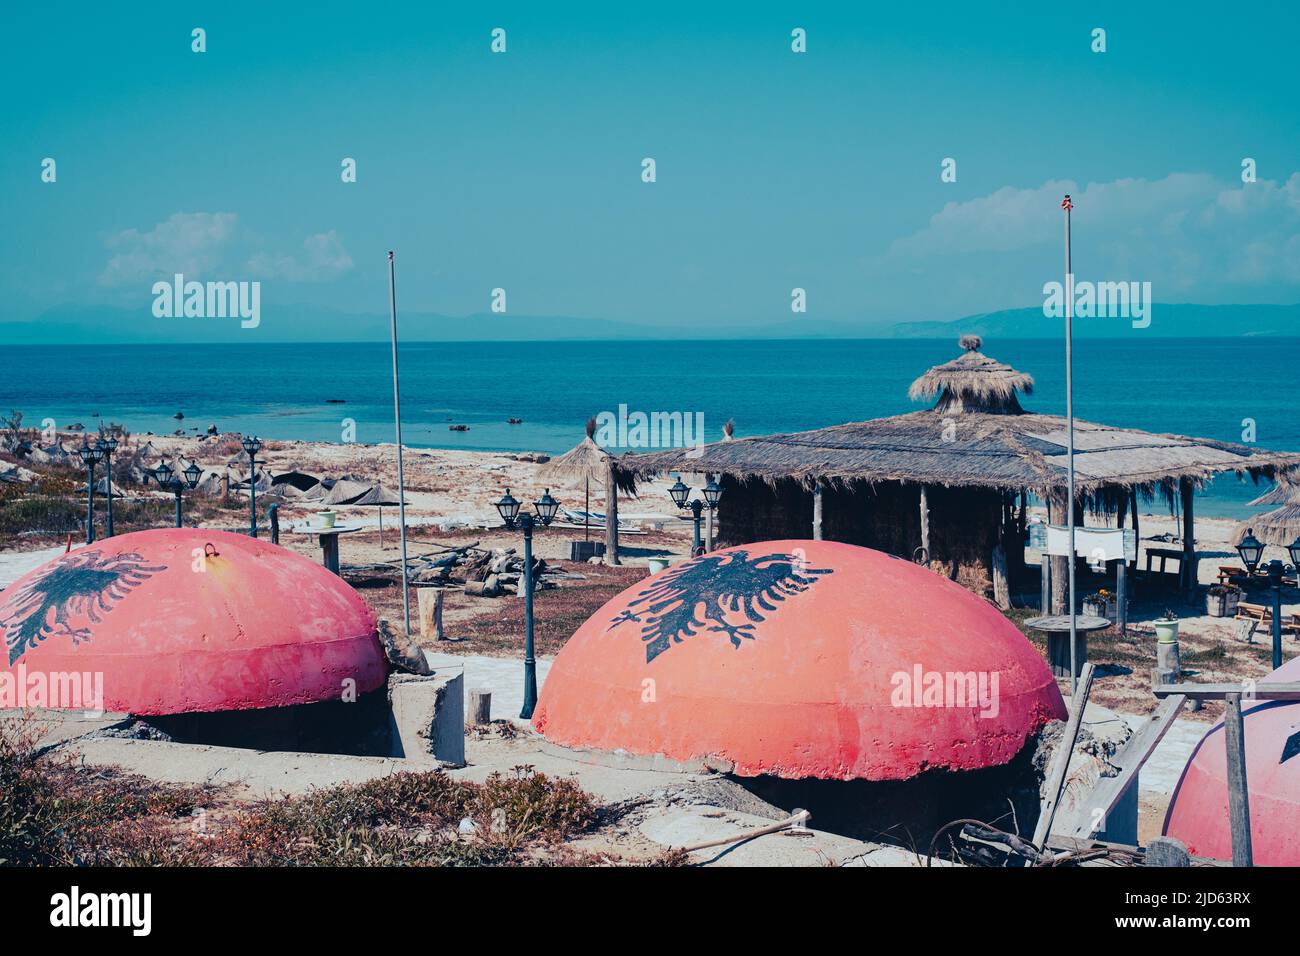 Bunkers on Cape of Rodon beach. Sightseeing and vacation in Albania Stock Photo